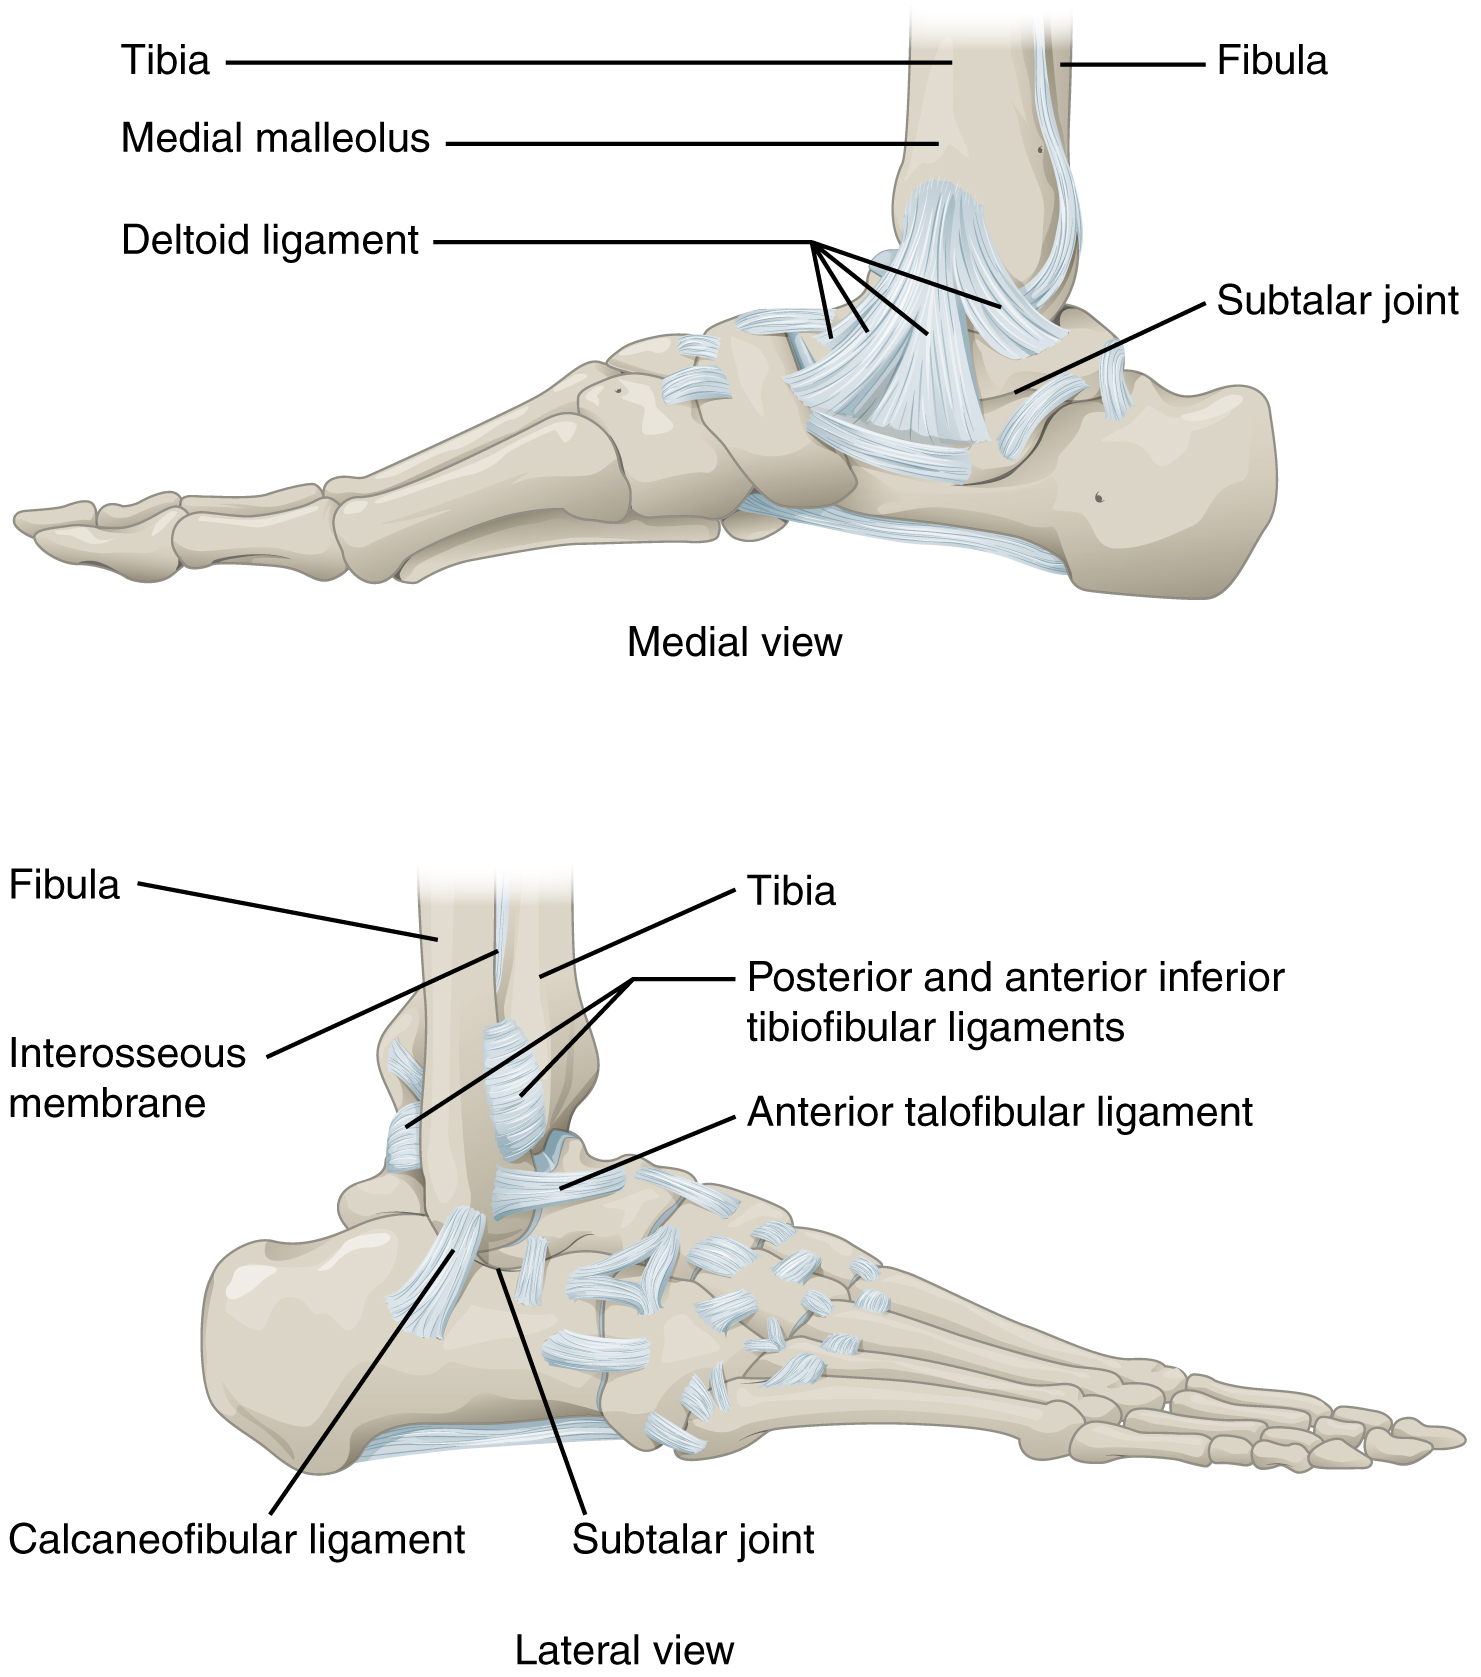 This figure shows the structure of the ankle and feet 